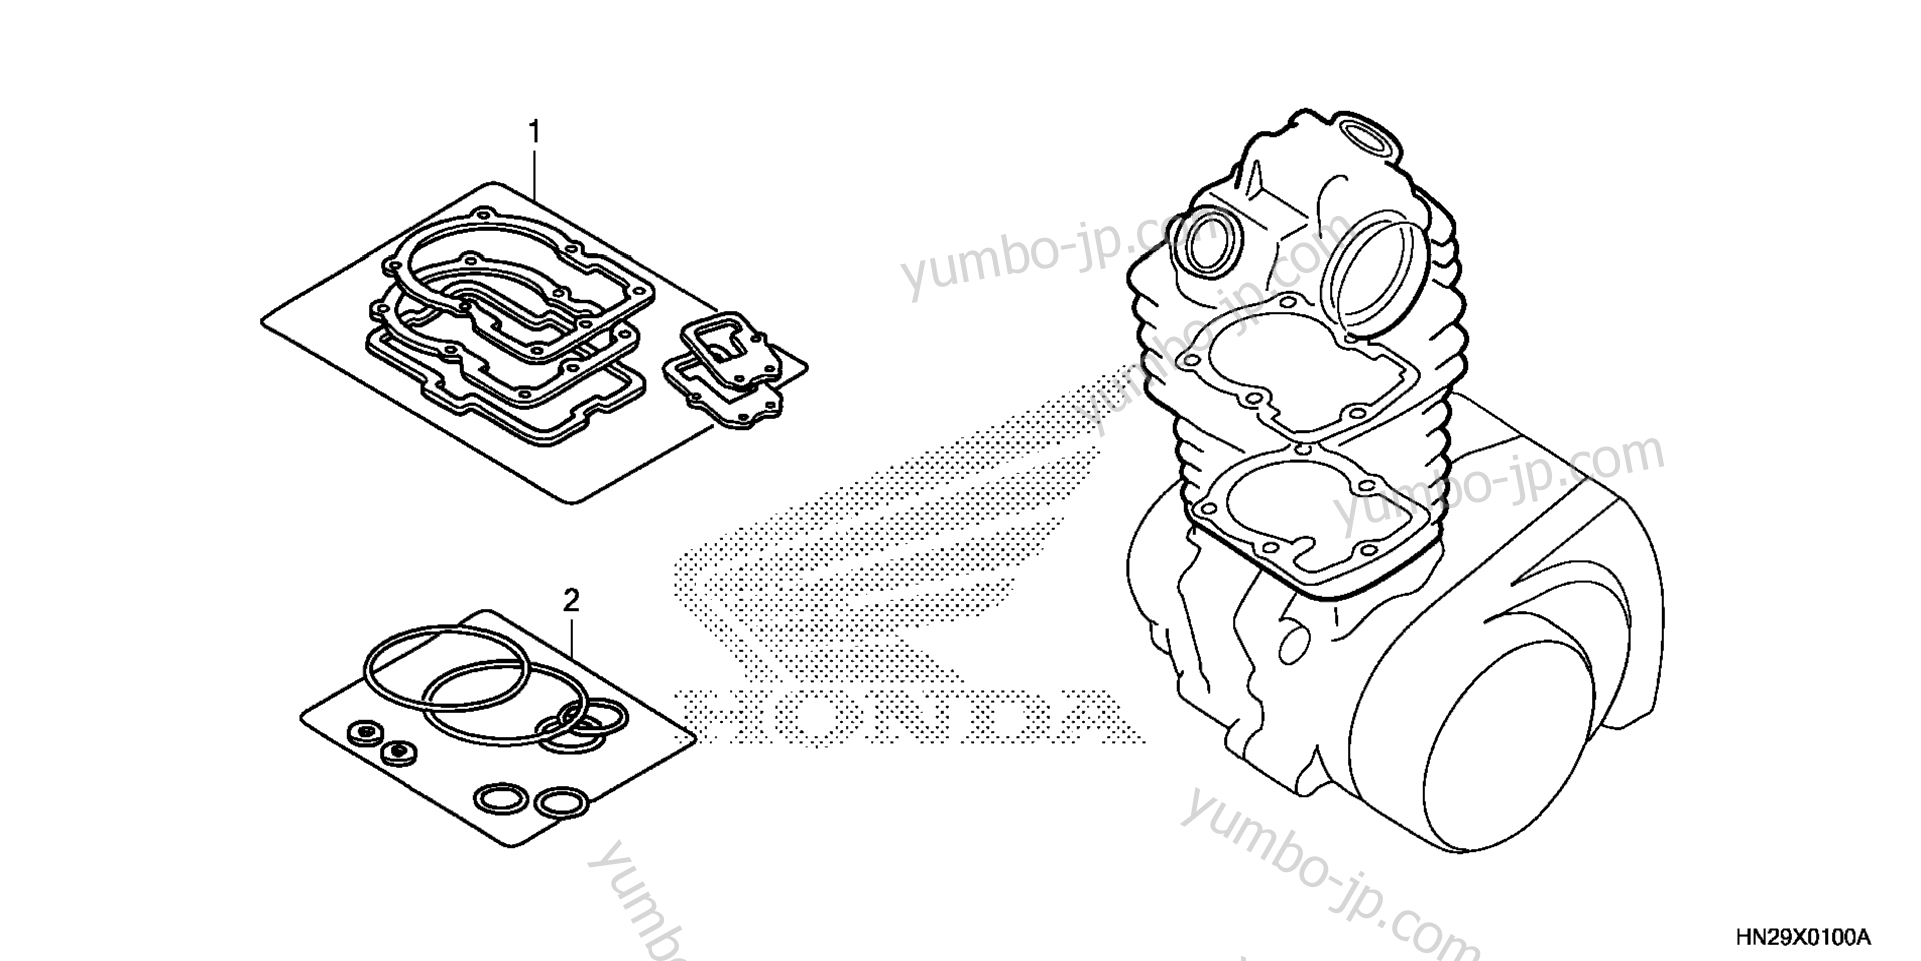 GASKET KIT A for ATVs HONDA TRX500FPA AC 2014 year